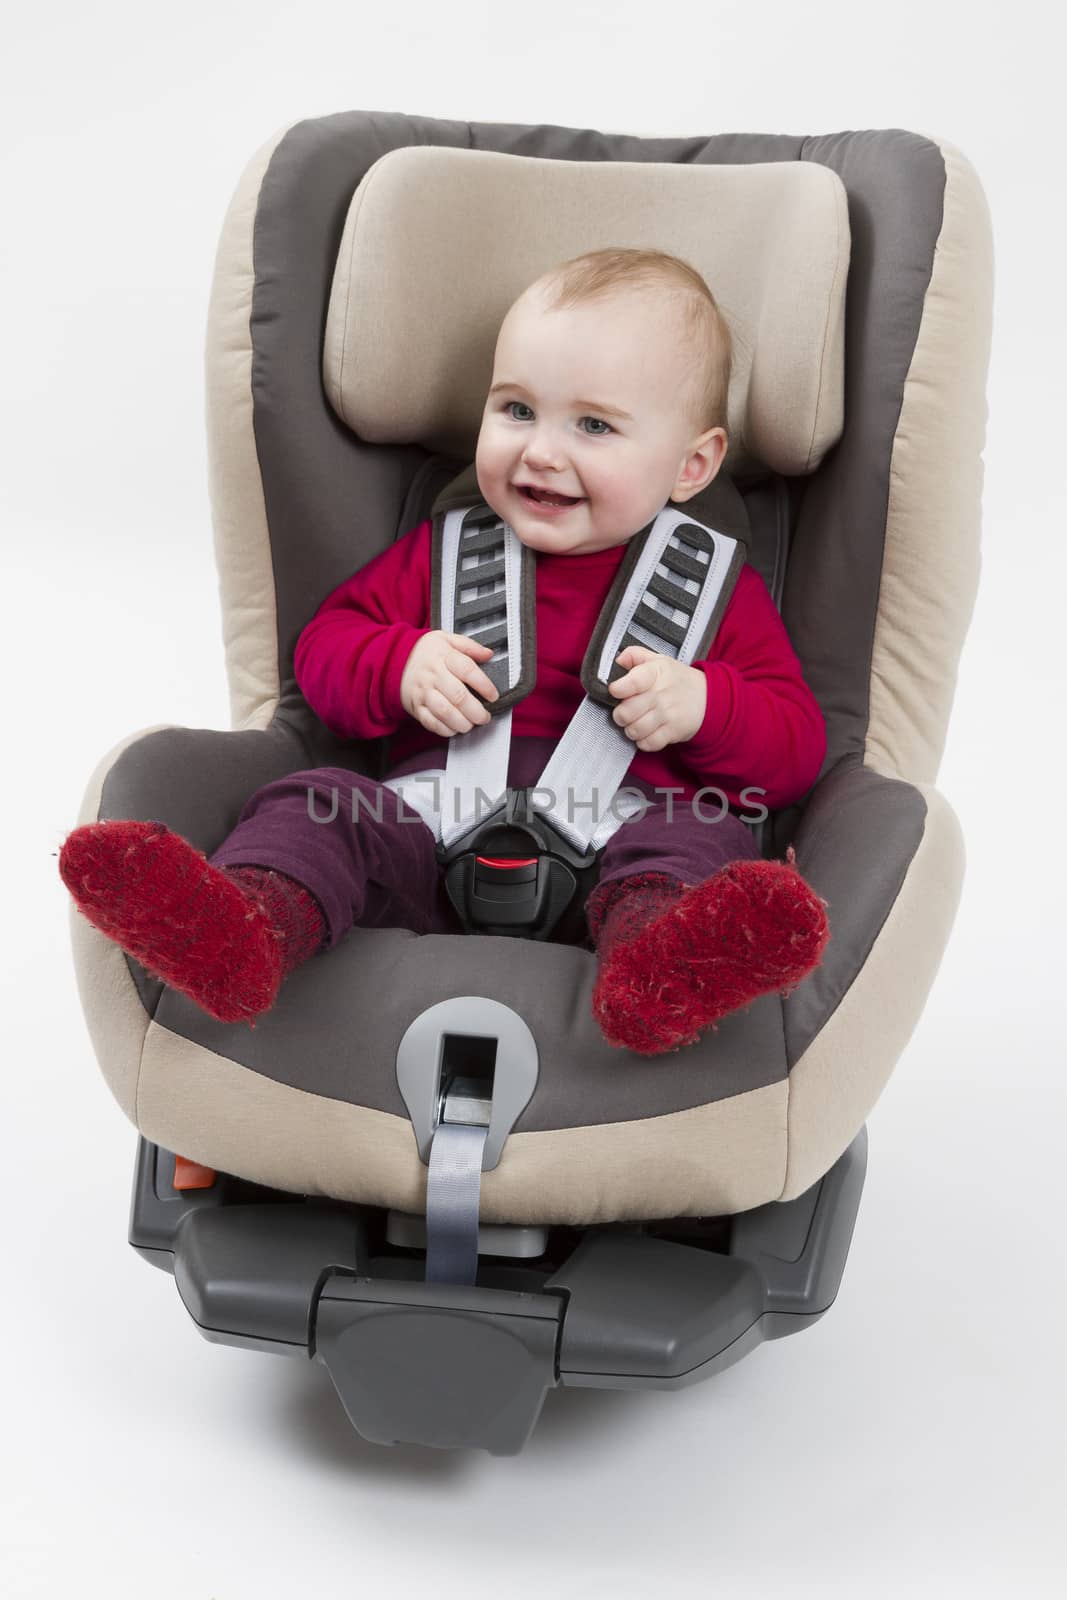 toddler in booster seat for a car in light background by gewoldi